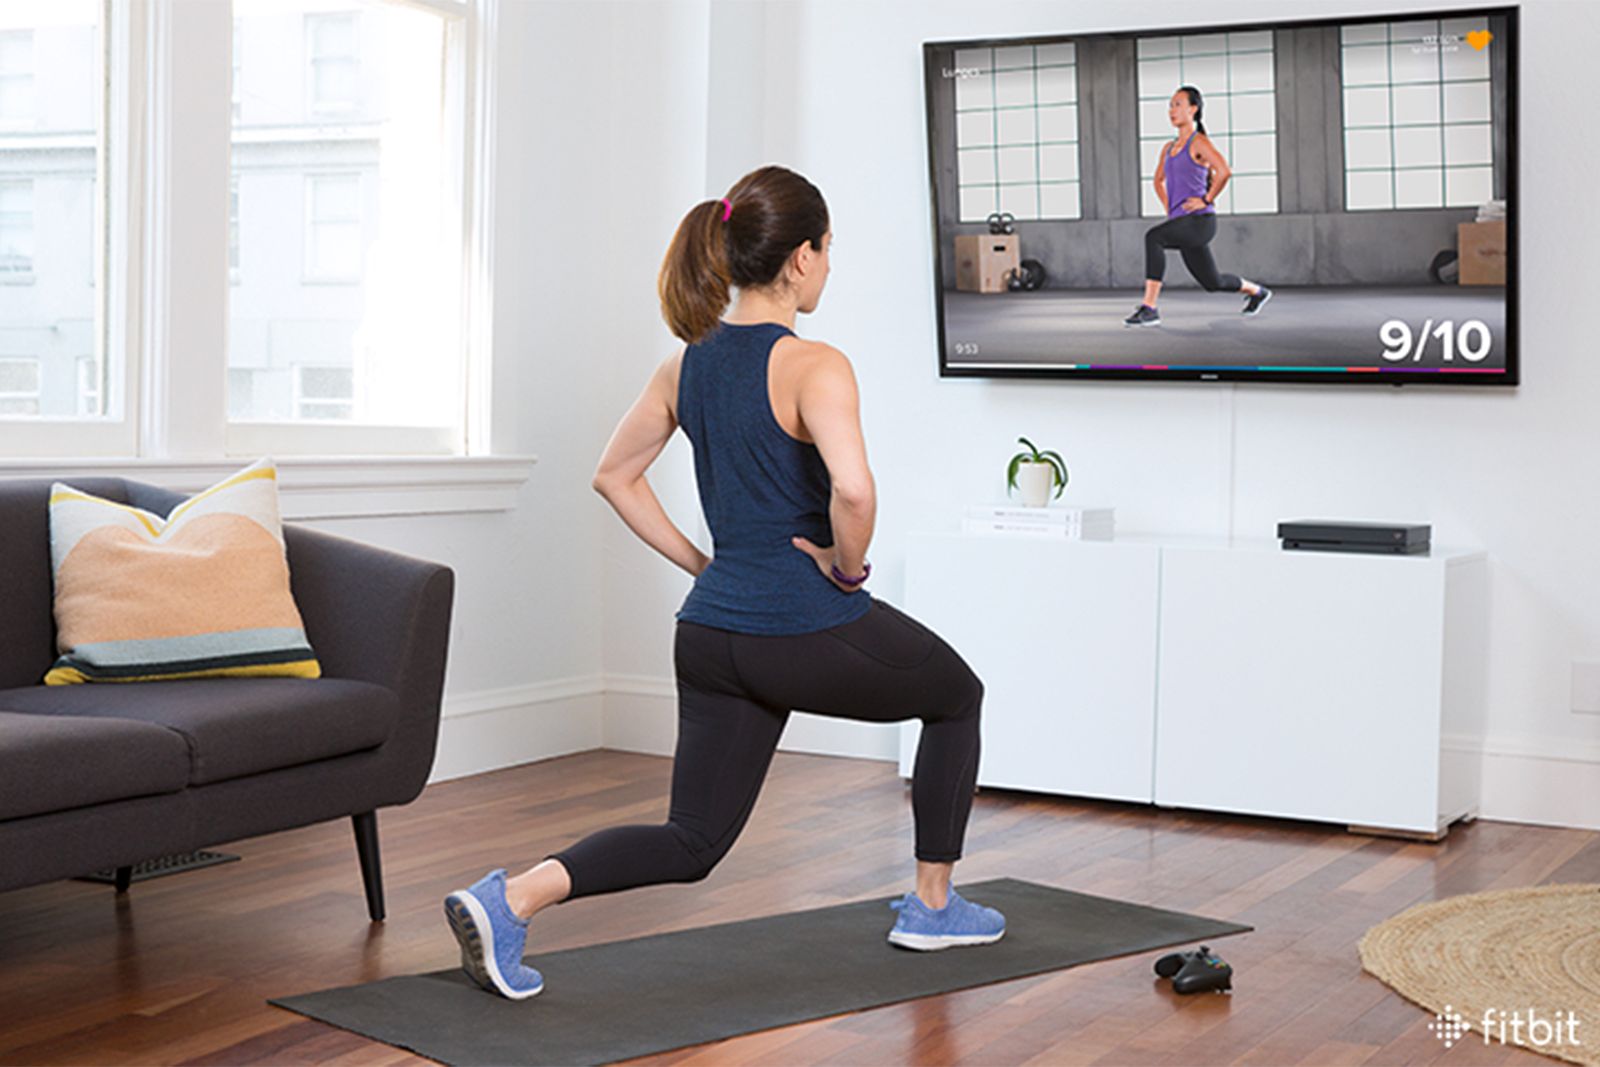 Fitbit has made home workouts easier with the Coach App for Xbox image 1